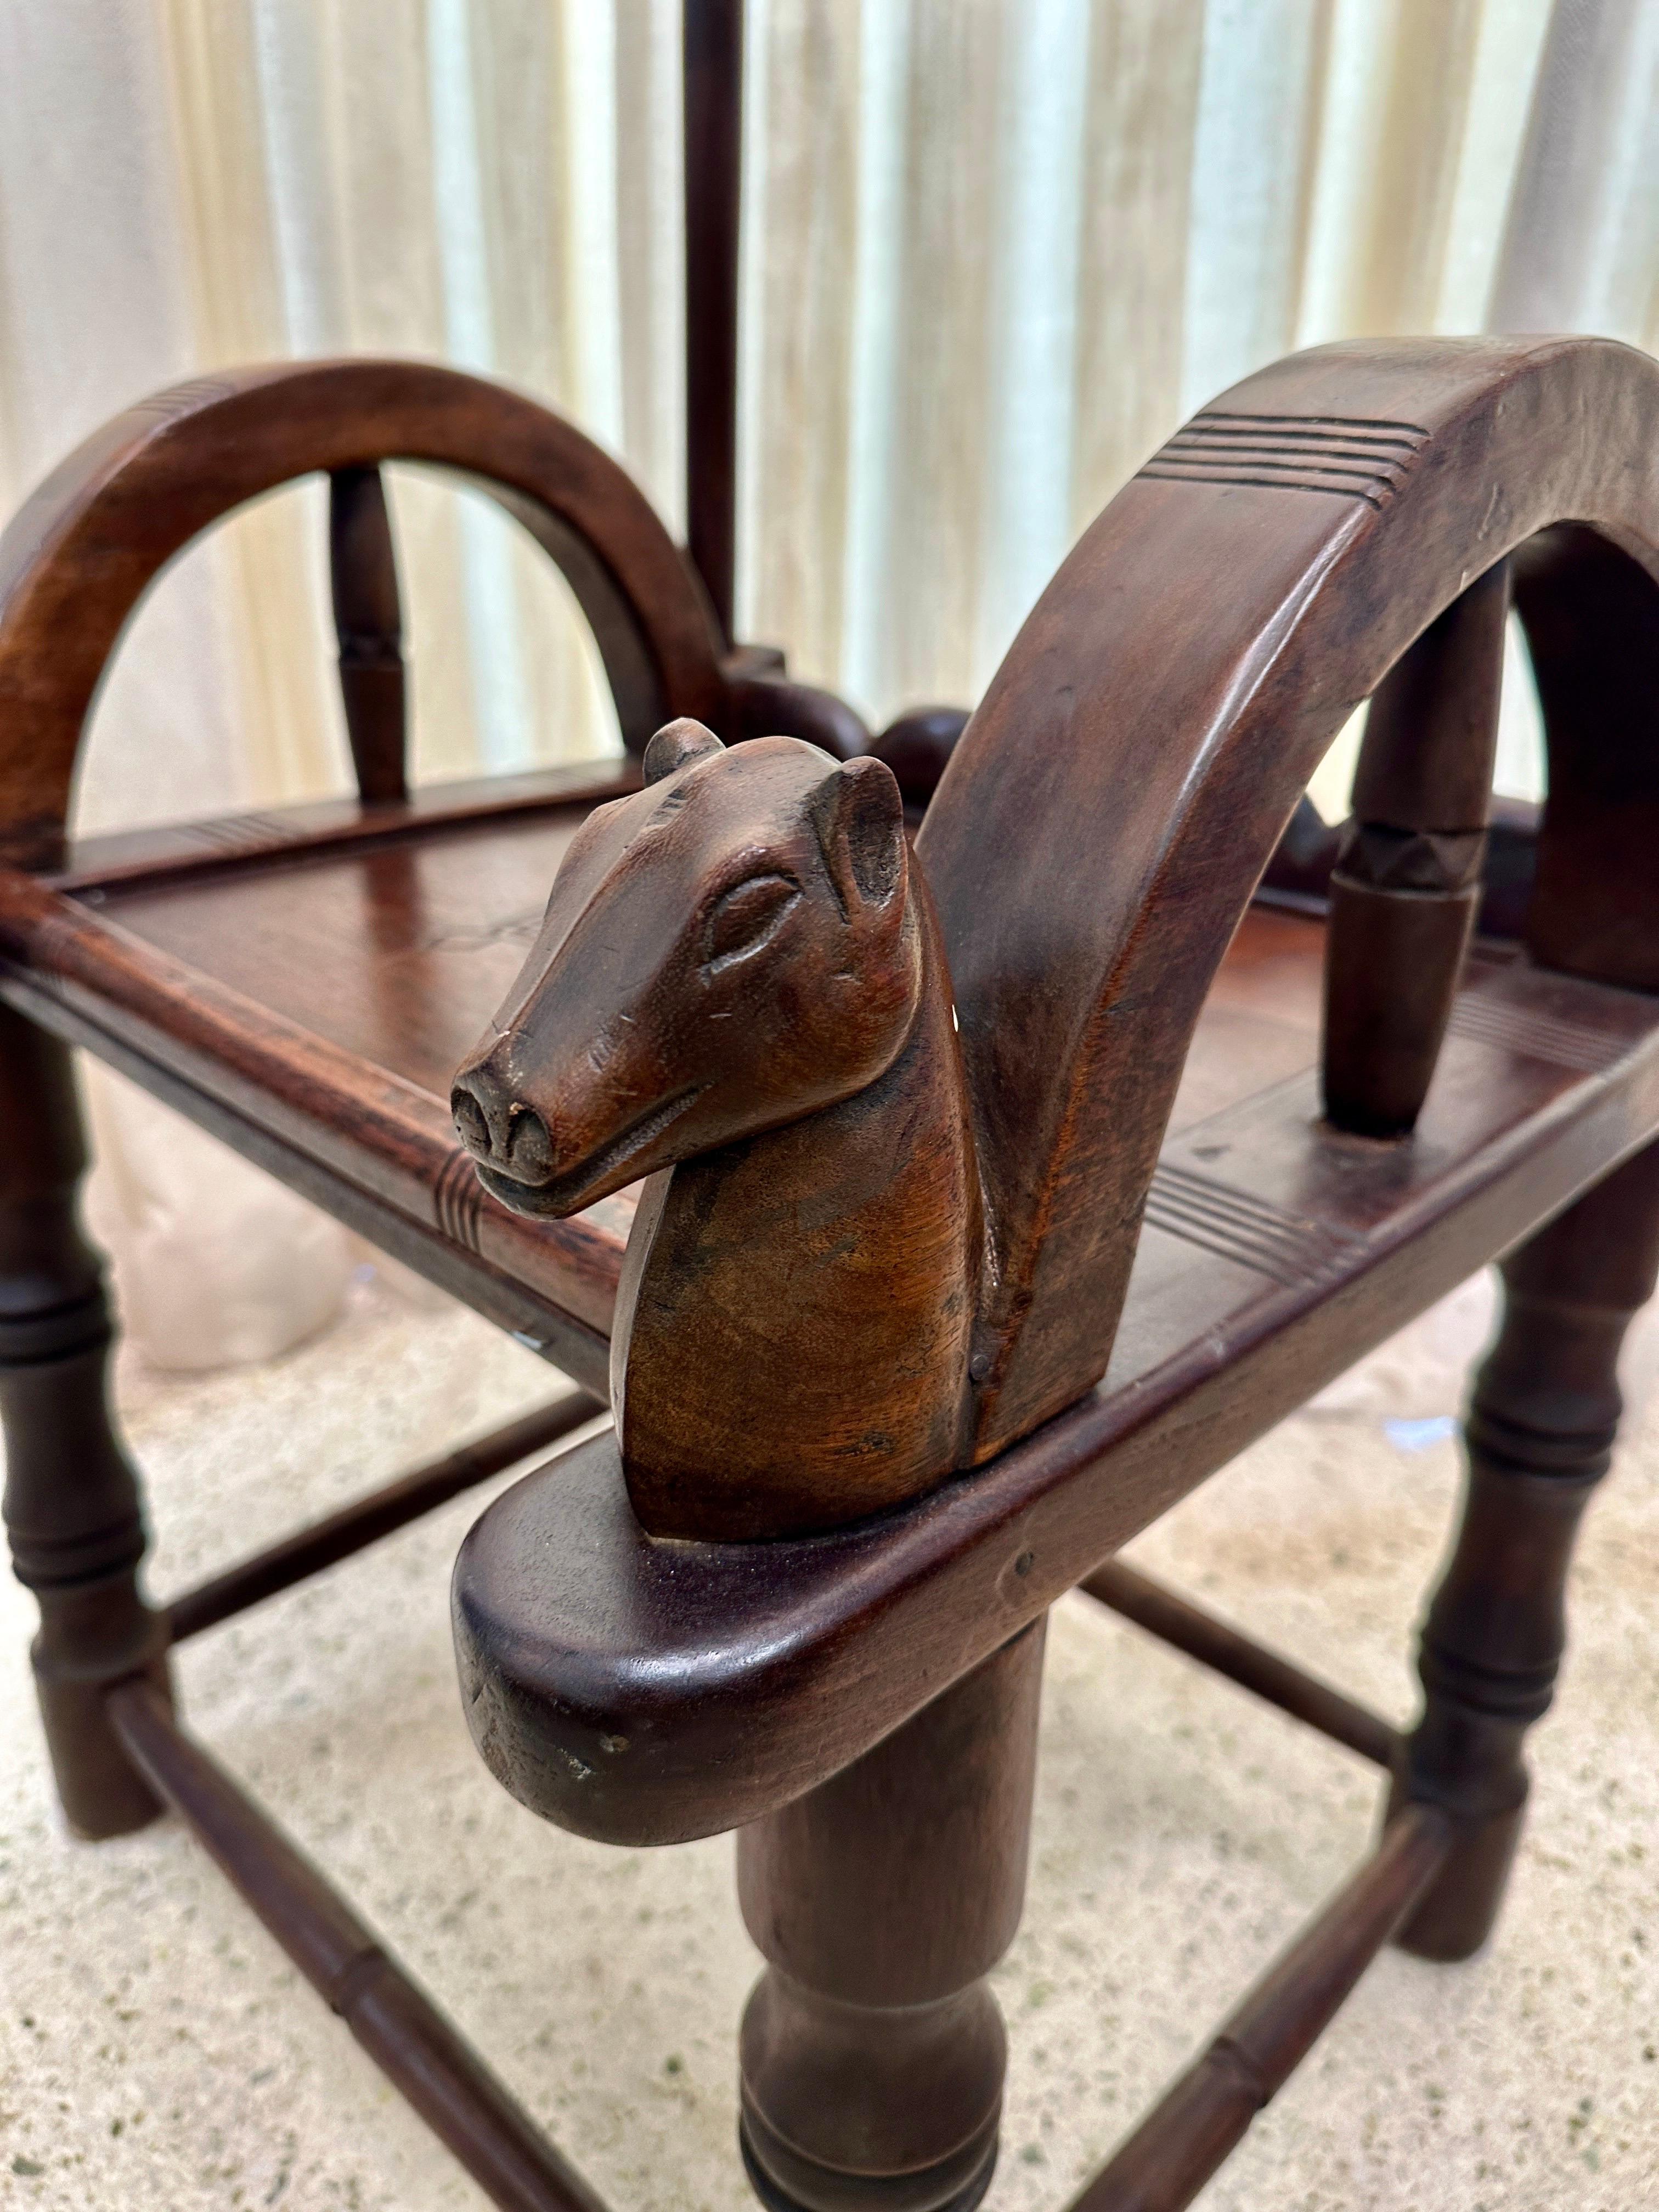 Original antique Baule Chief's chair made of traditional carving and arched back design.  The Baule Tribe from the Ivory Coast of West Africa is well-known for their artistic tribal art, sculptures, and furniture. With a rich cultural history, their